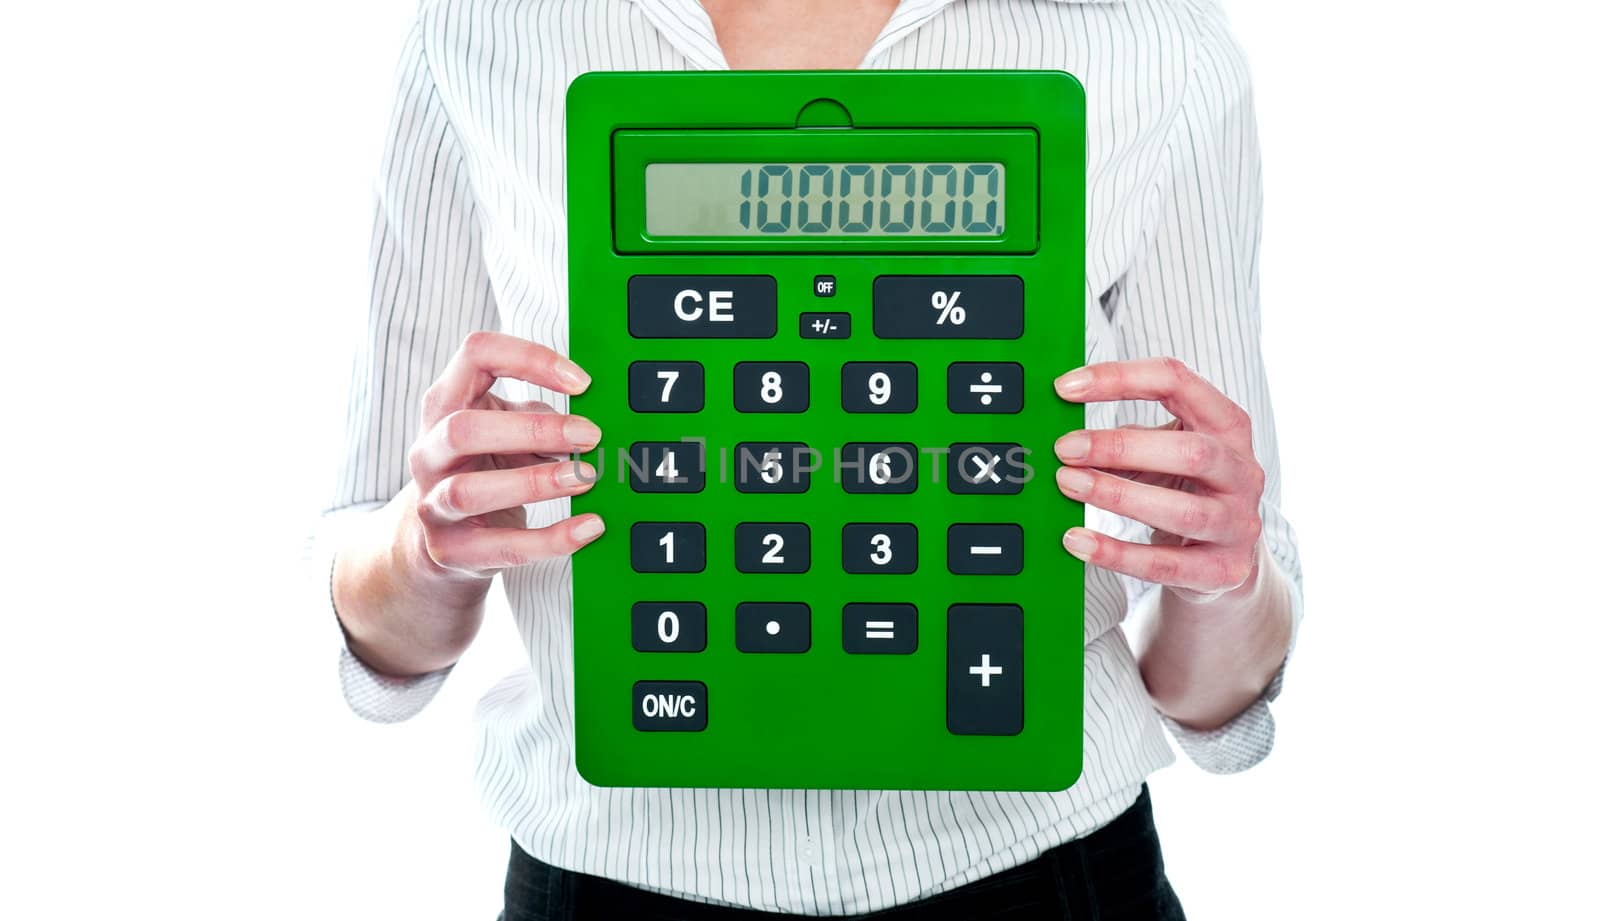 Focus on green calculator. Woman holding. Business concept